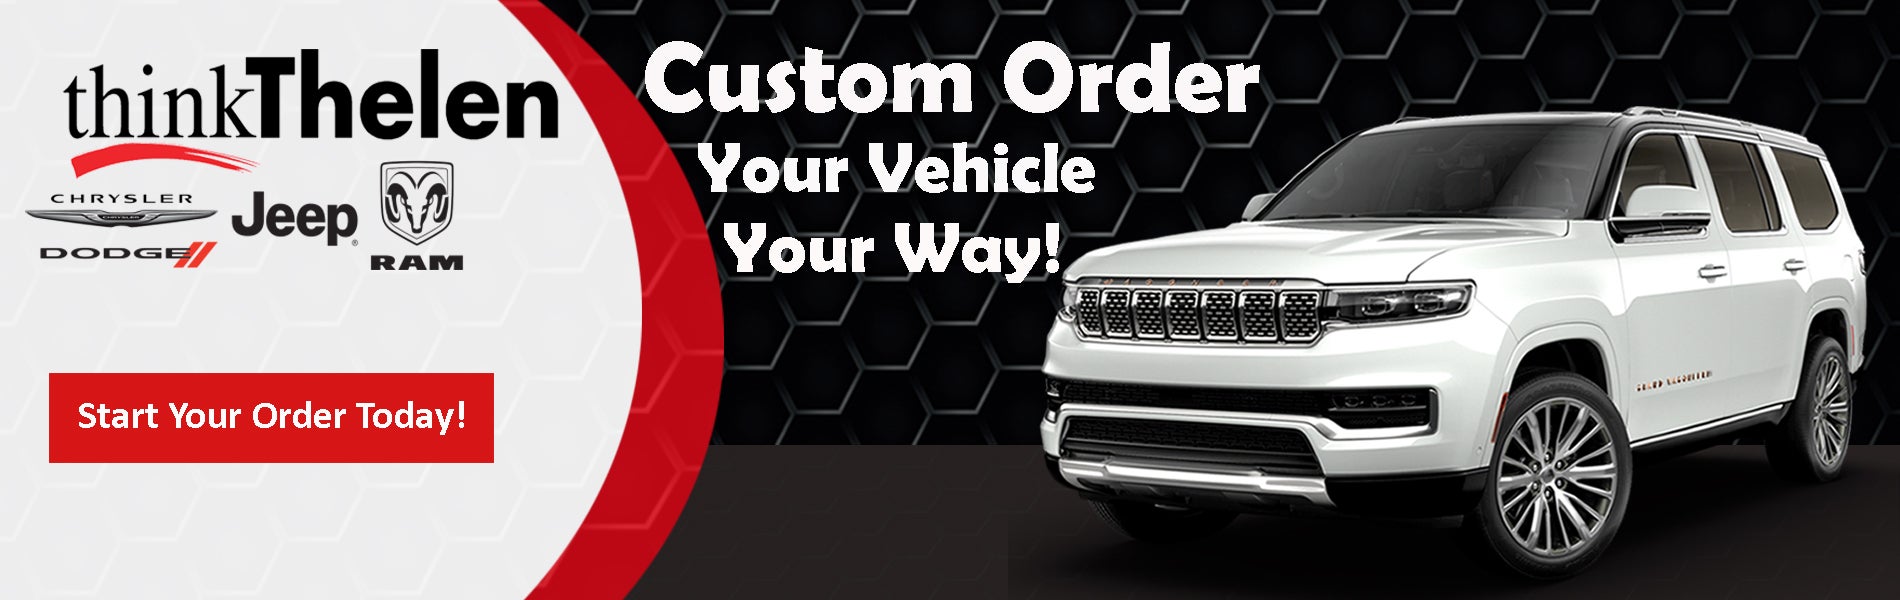 Custom Order your vehicle your way!